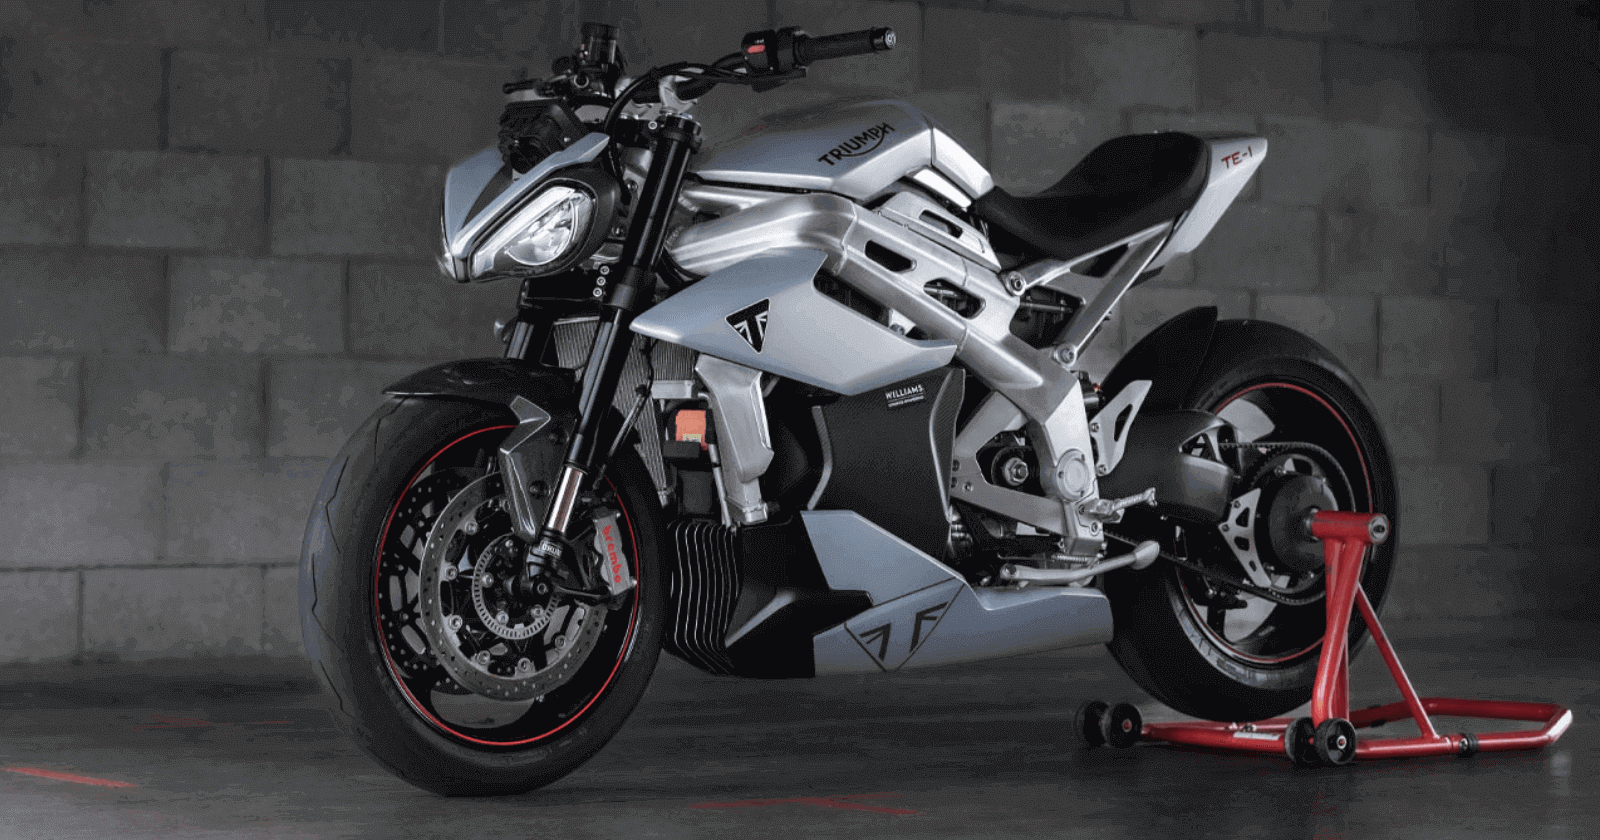 Upcoming Triumph Bikes in India: Expected Launch Date and Price